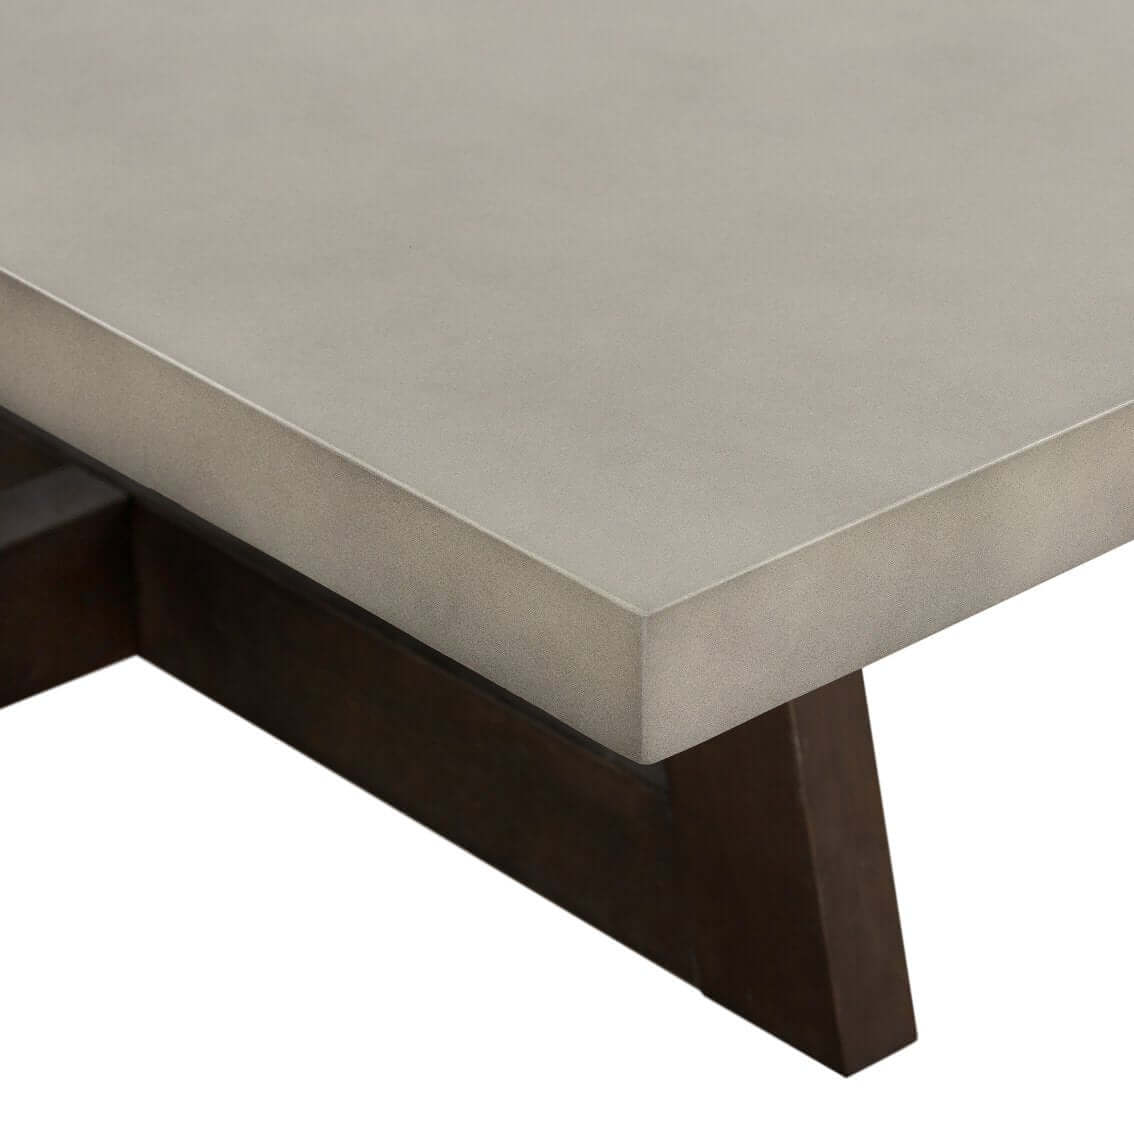 Concrete Top Rectangular Wood Framed Coffee Table in Gray And Brown 55"